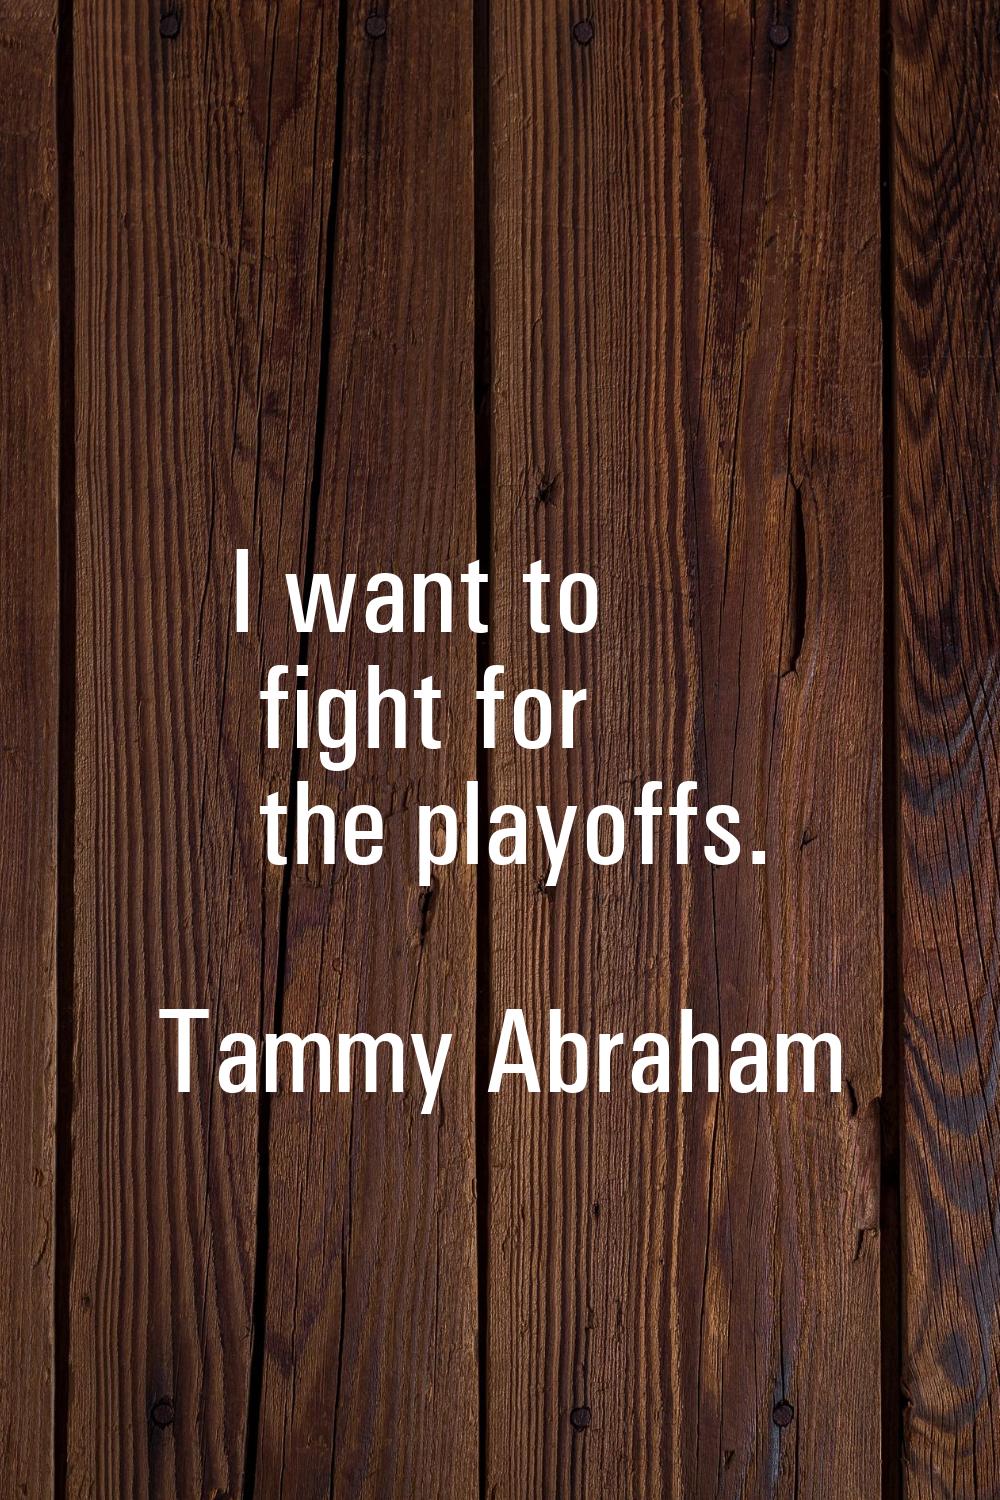 I want to fight for the playoffs.